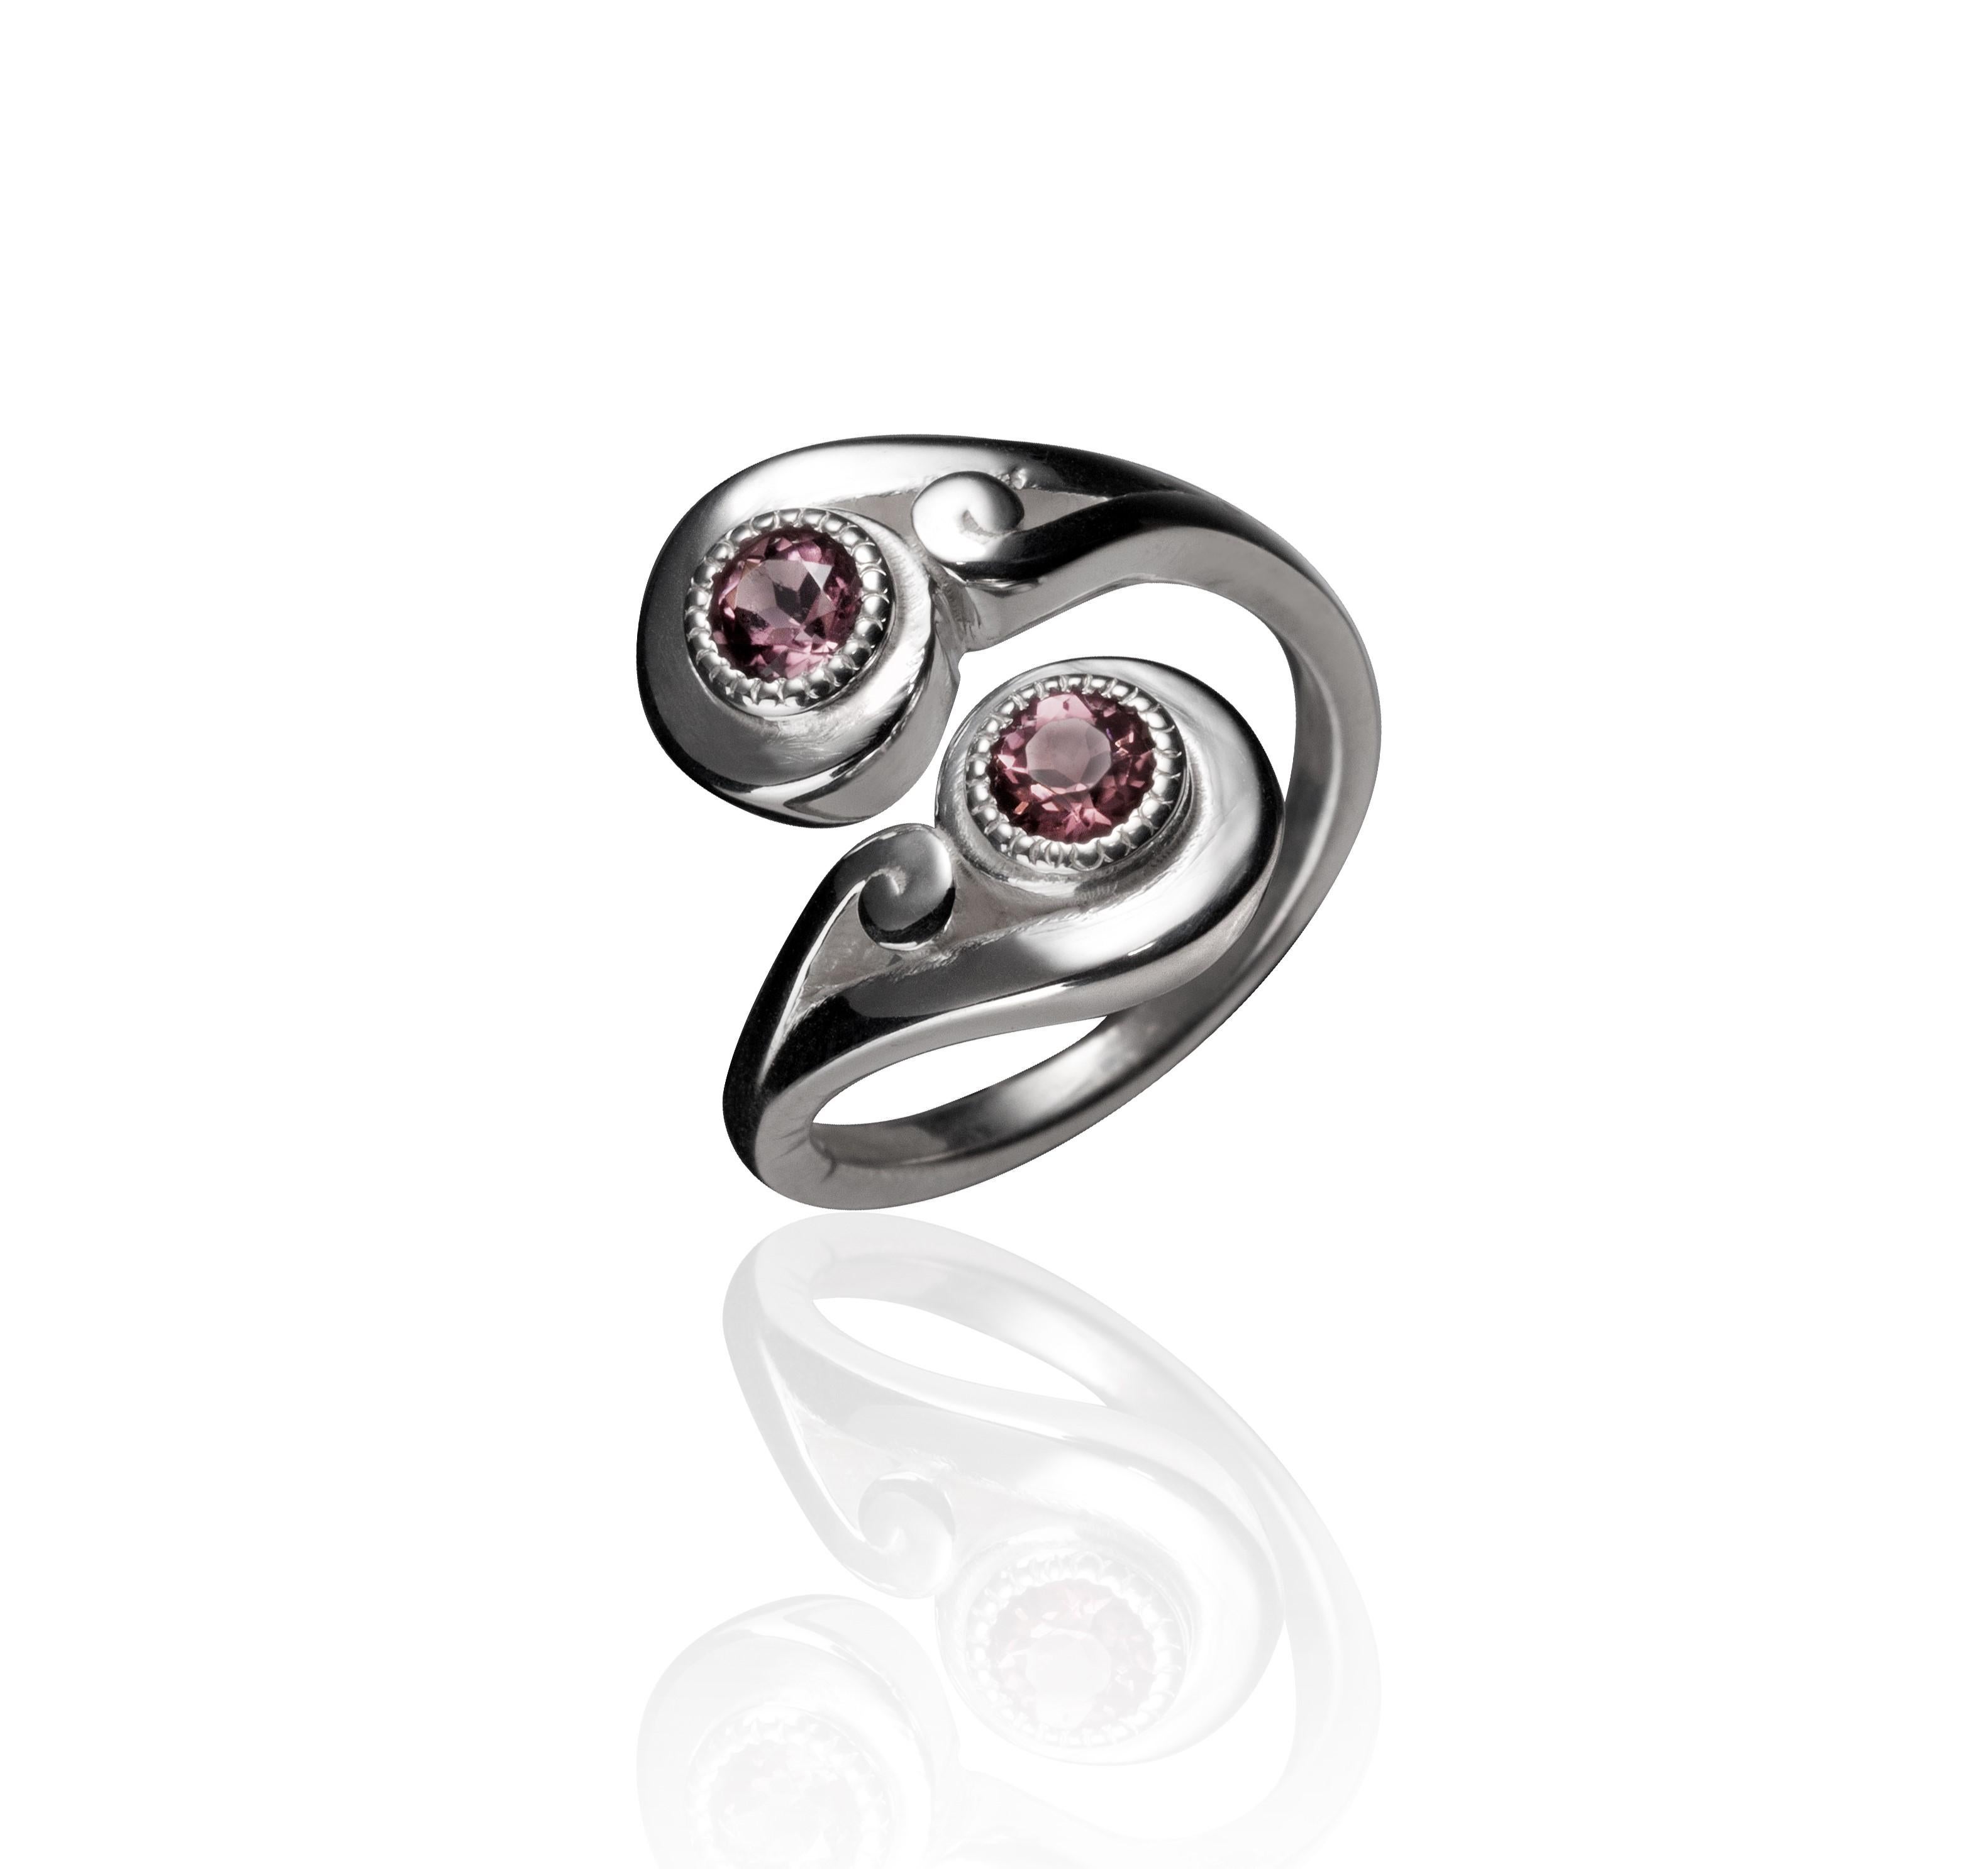 Two simple, sterling silver double spirals from the Nebula collection cross over one another to form a fun and daily wear elegant ring that is somewhat size adjustable and fun to stack 2 together! The design celebrates the spiral nebulae of the